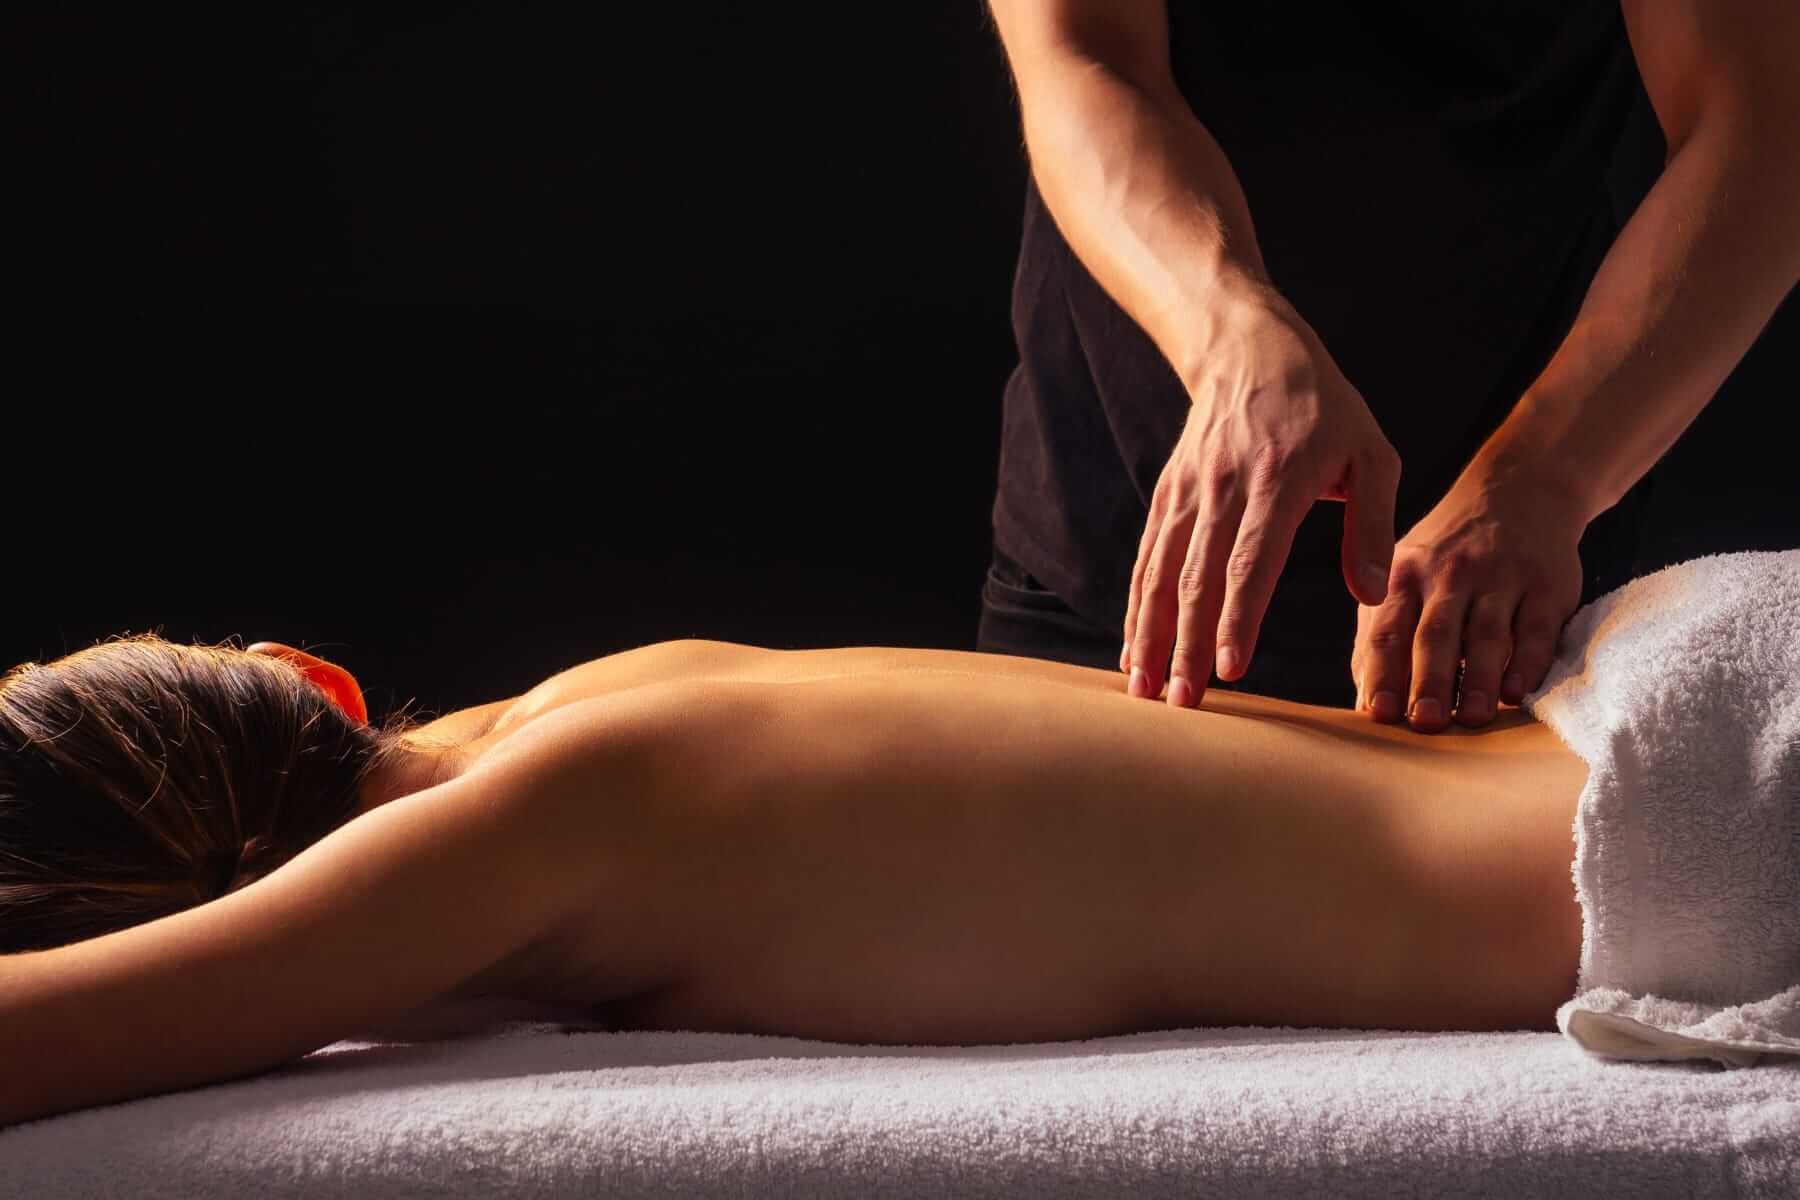 How to gie a massage